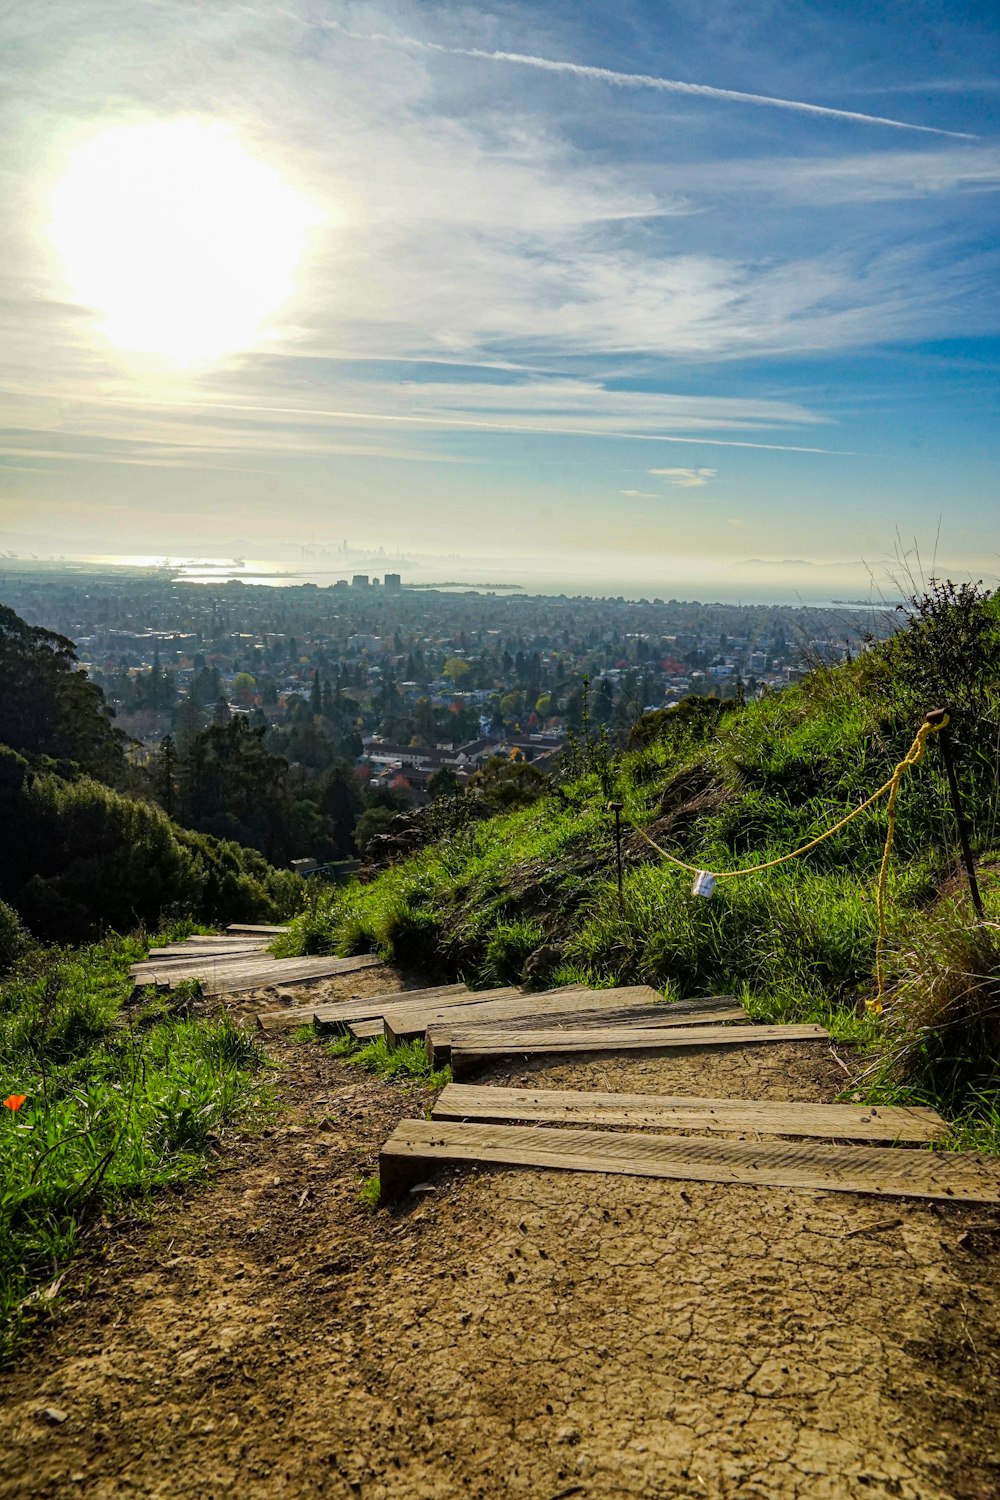 a wooden path going up a hill with a view of a city in the distance